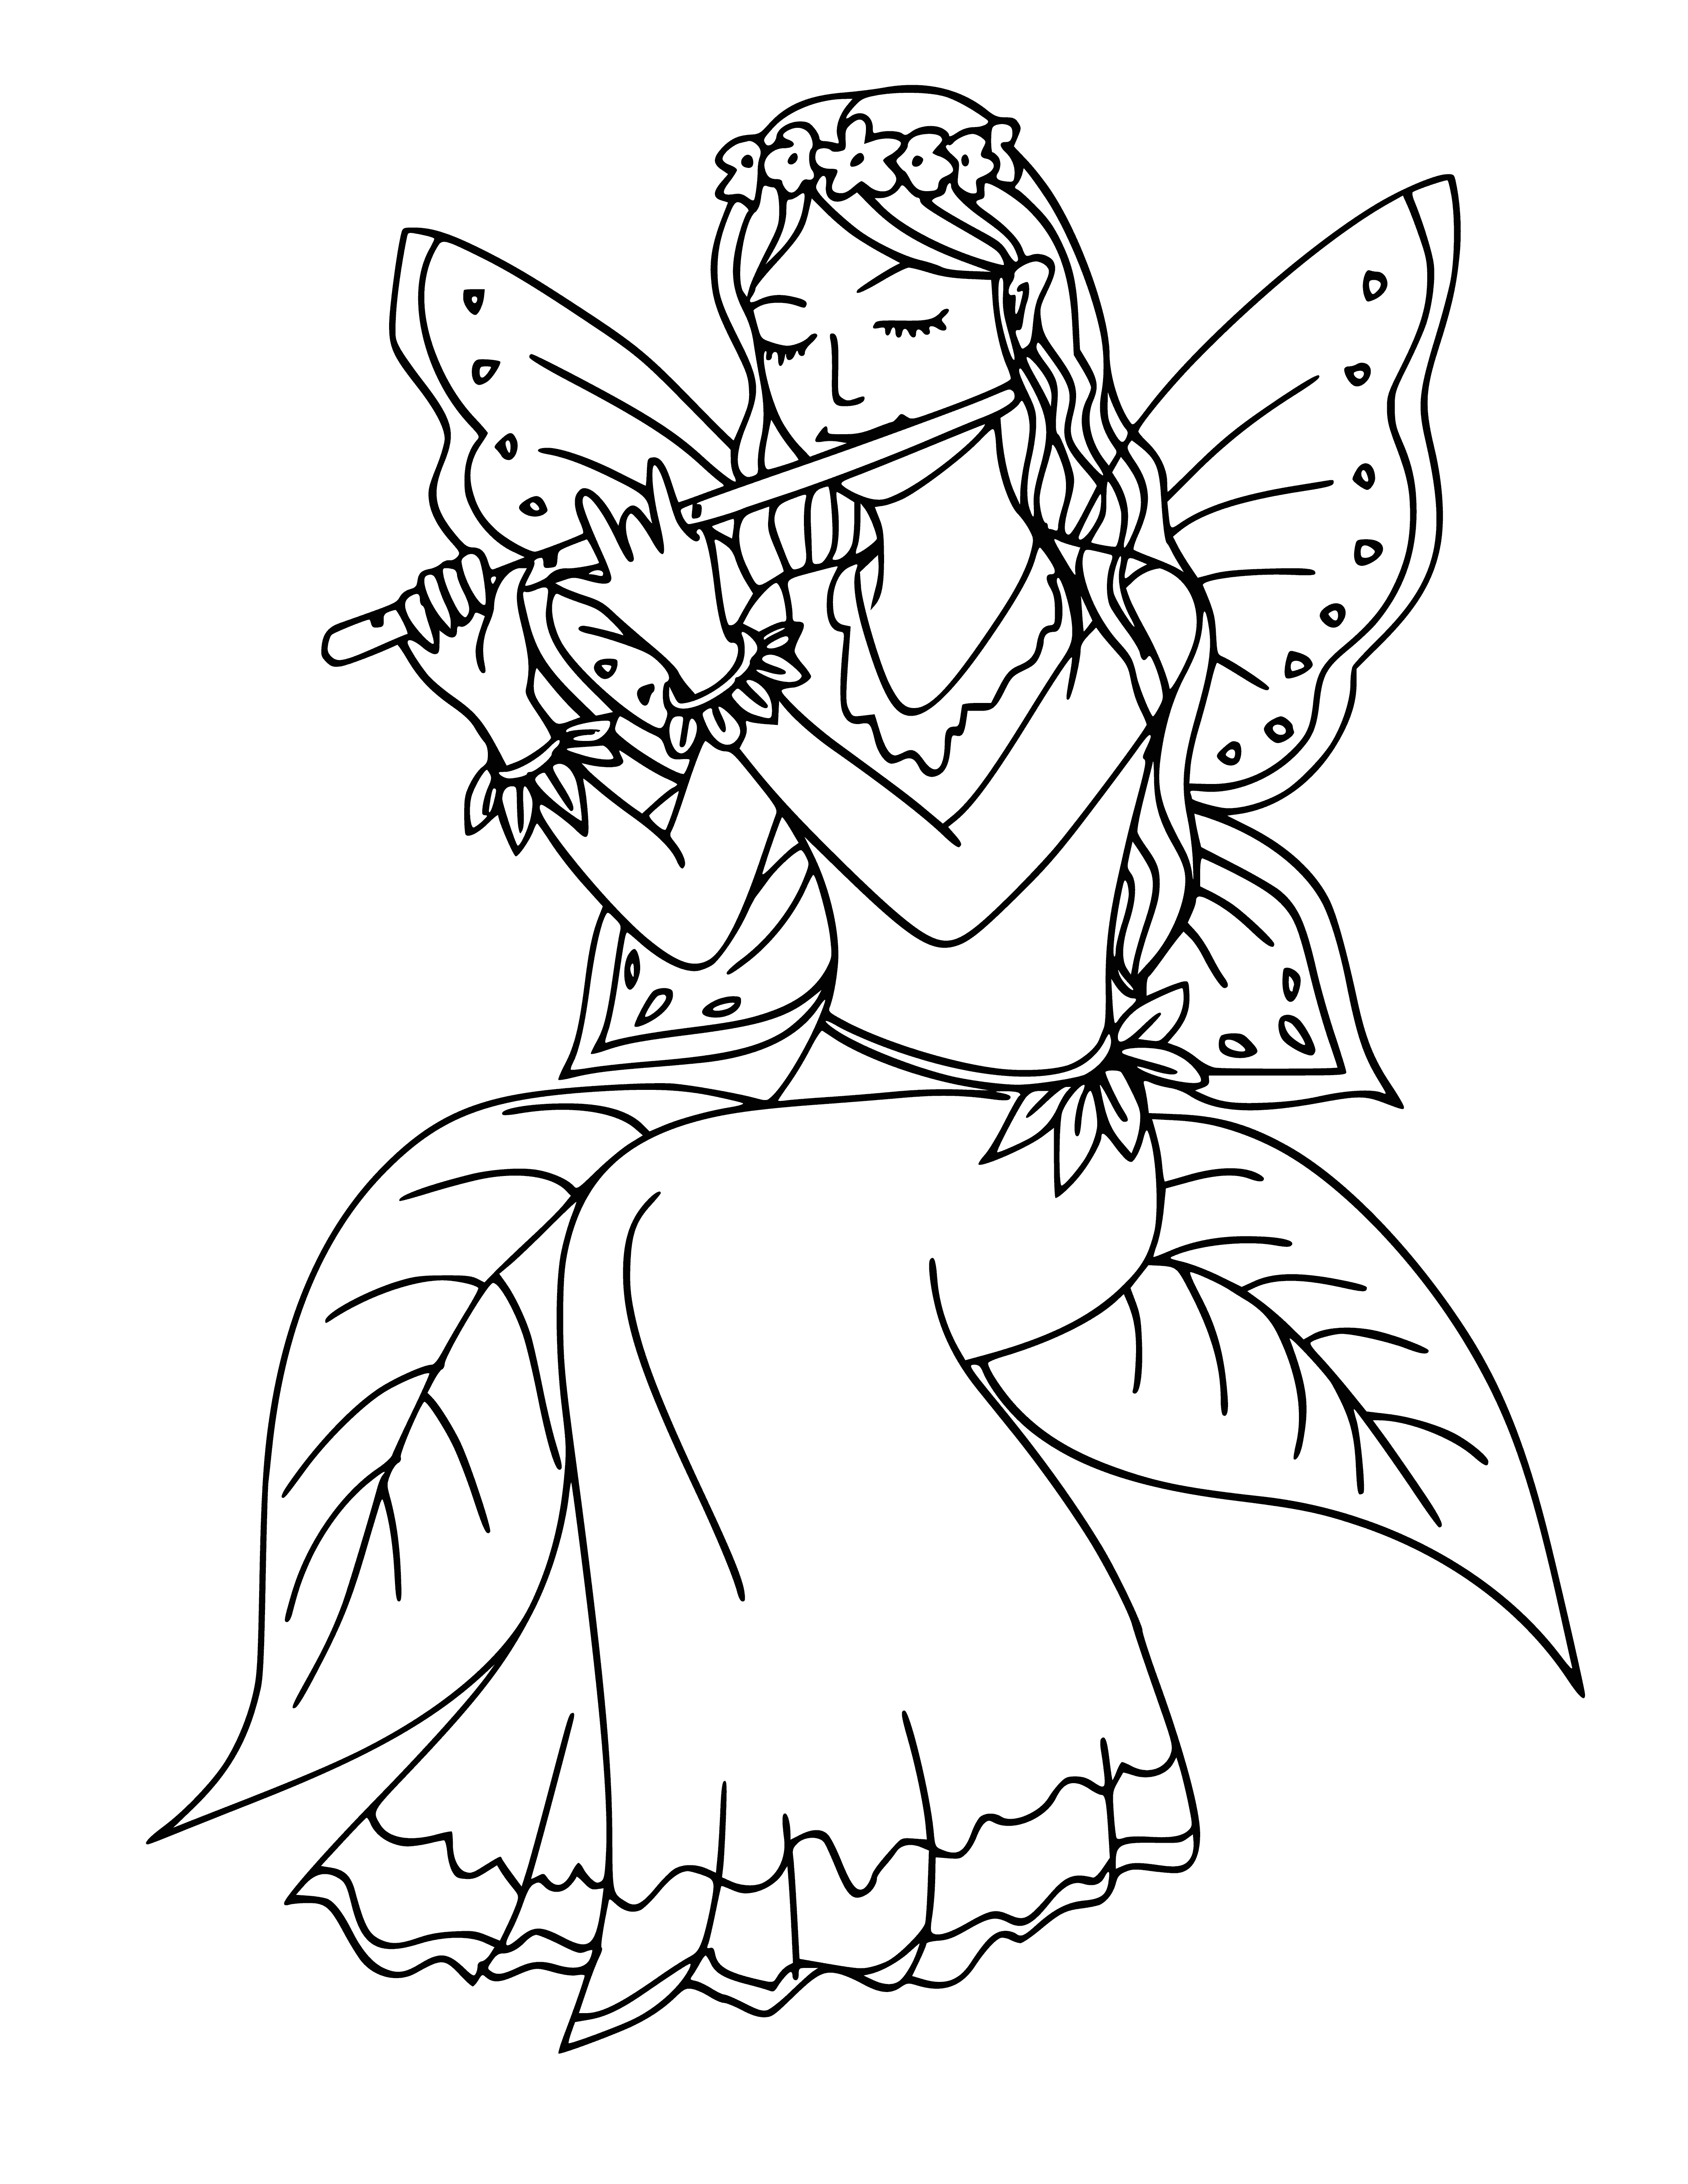 coloring page: A delicate fairy with golden-yellow hair plays a pipe, head tilted back in concentration. Pale skin and large wings complete the look.